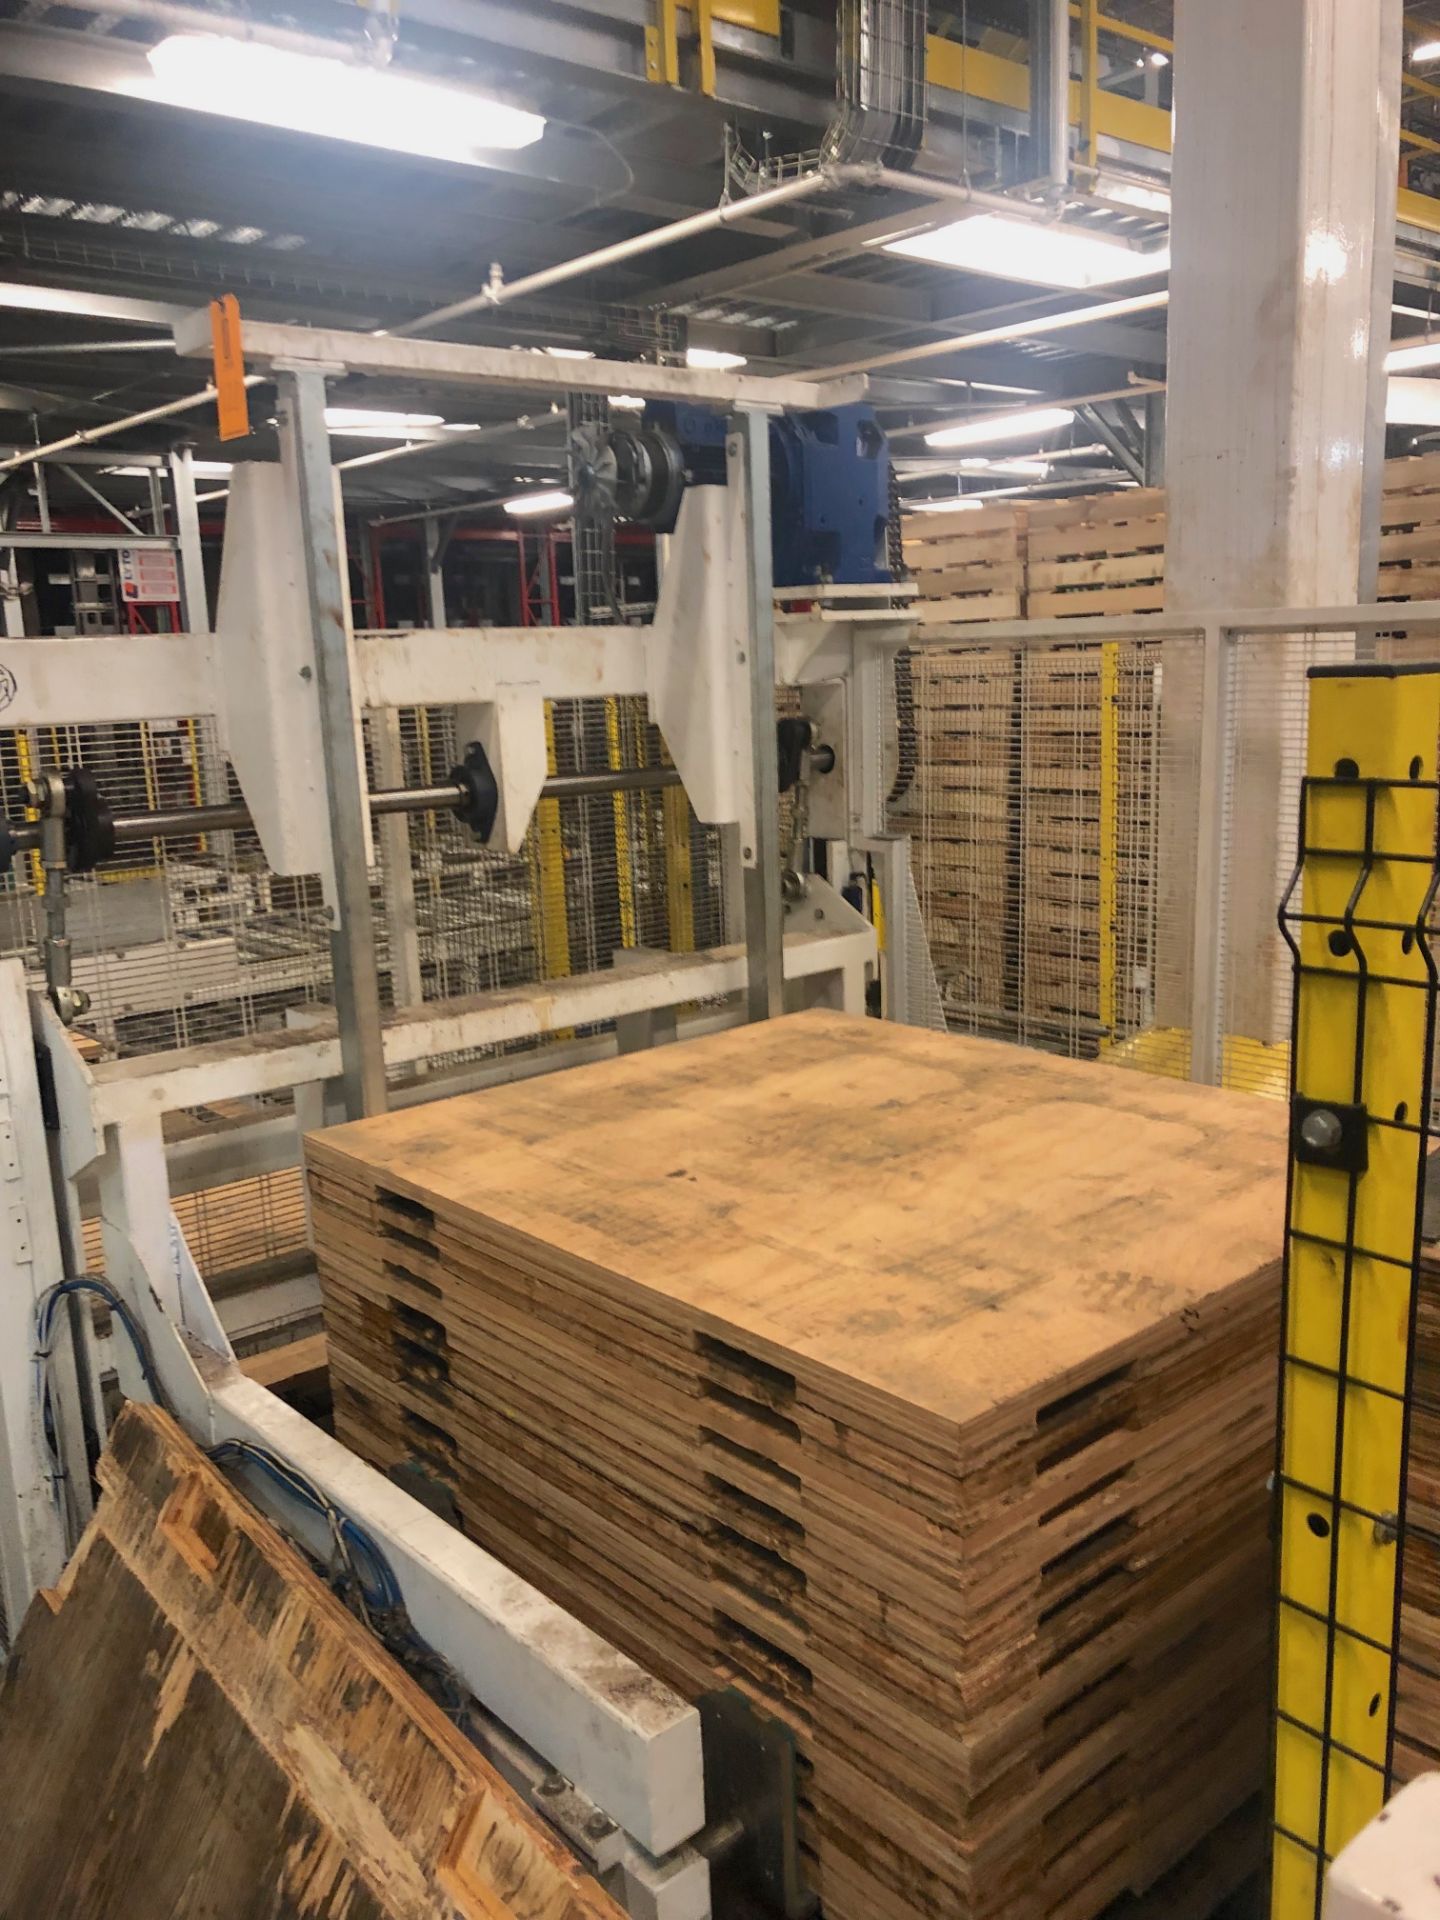 Pallet Dispenser Loading Area (to Feed Pallets to Robotic Palletizers) - Image 10 of 17